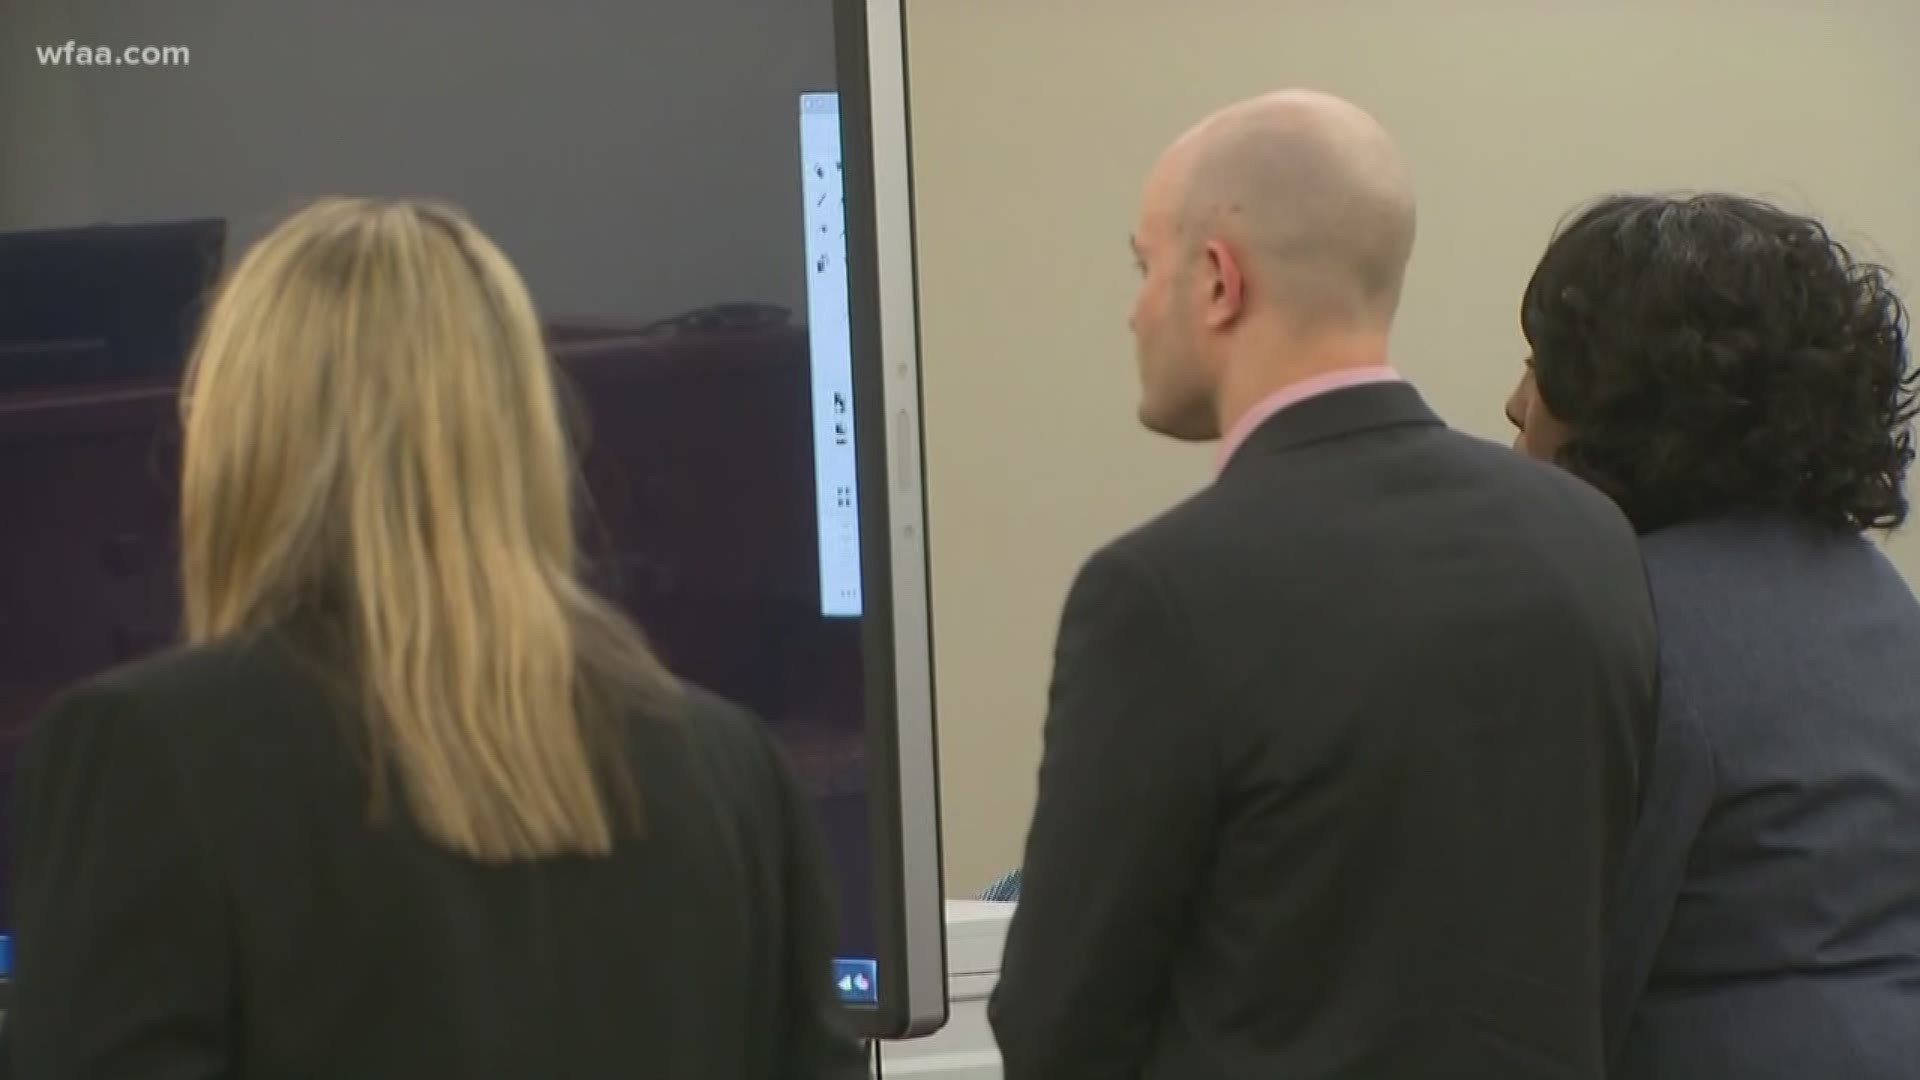 Charles Bryant, 31, was found guilty of murder in the death of Jacqueline Vandagriff.